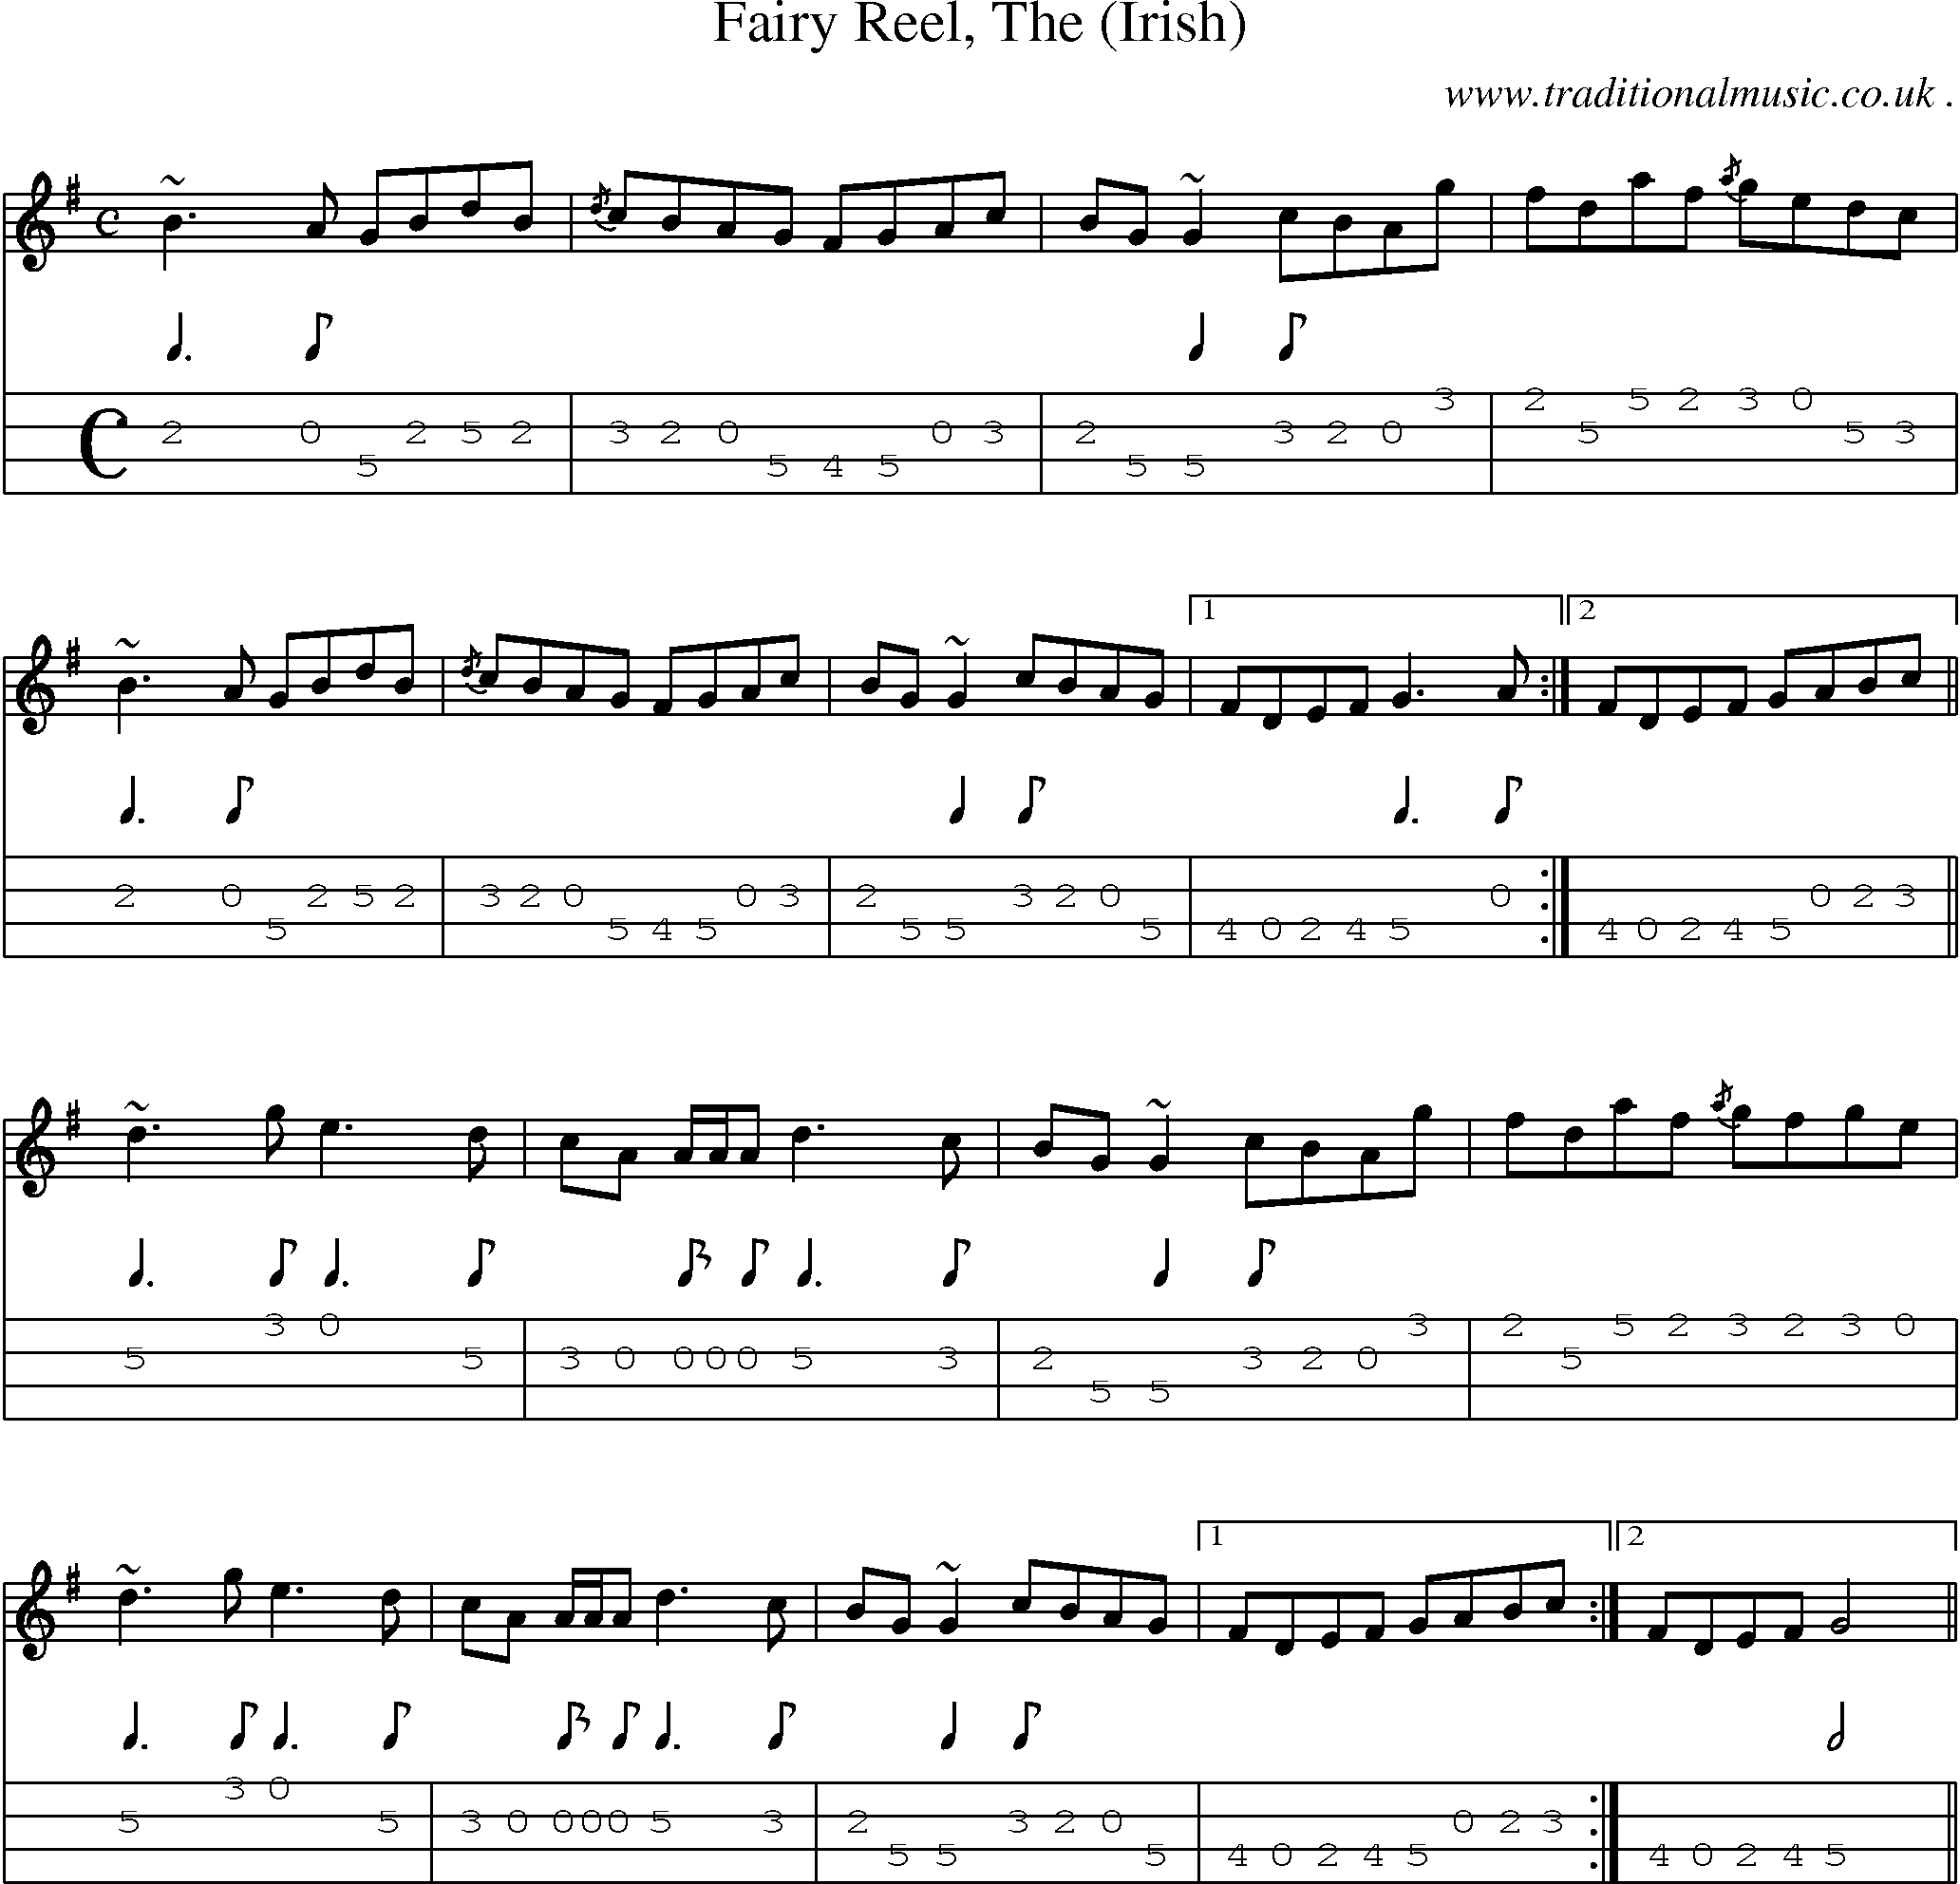 Sheet-music  score, Chords and Mandolin Tabs for Fairy Reel The Irish